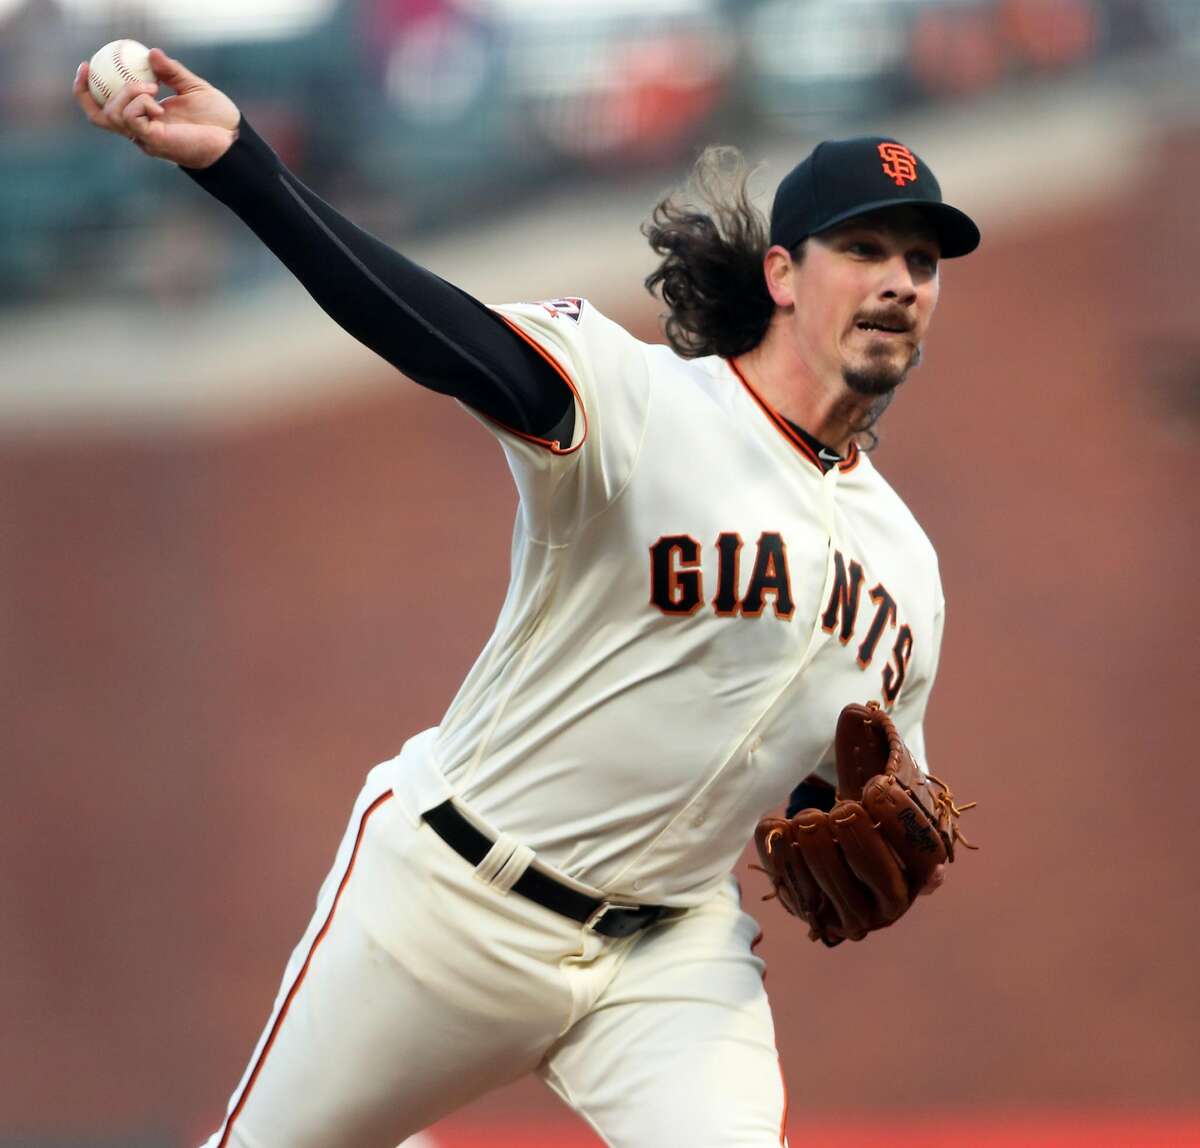 San Francisco Giants' Jeff Samardzija delivers in 1st inning against Colorado Rockies during MLB game at AT&T Park in San Francisco, CA on Thursday, May 17, 2018.